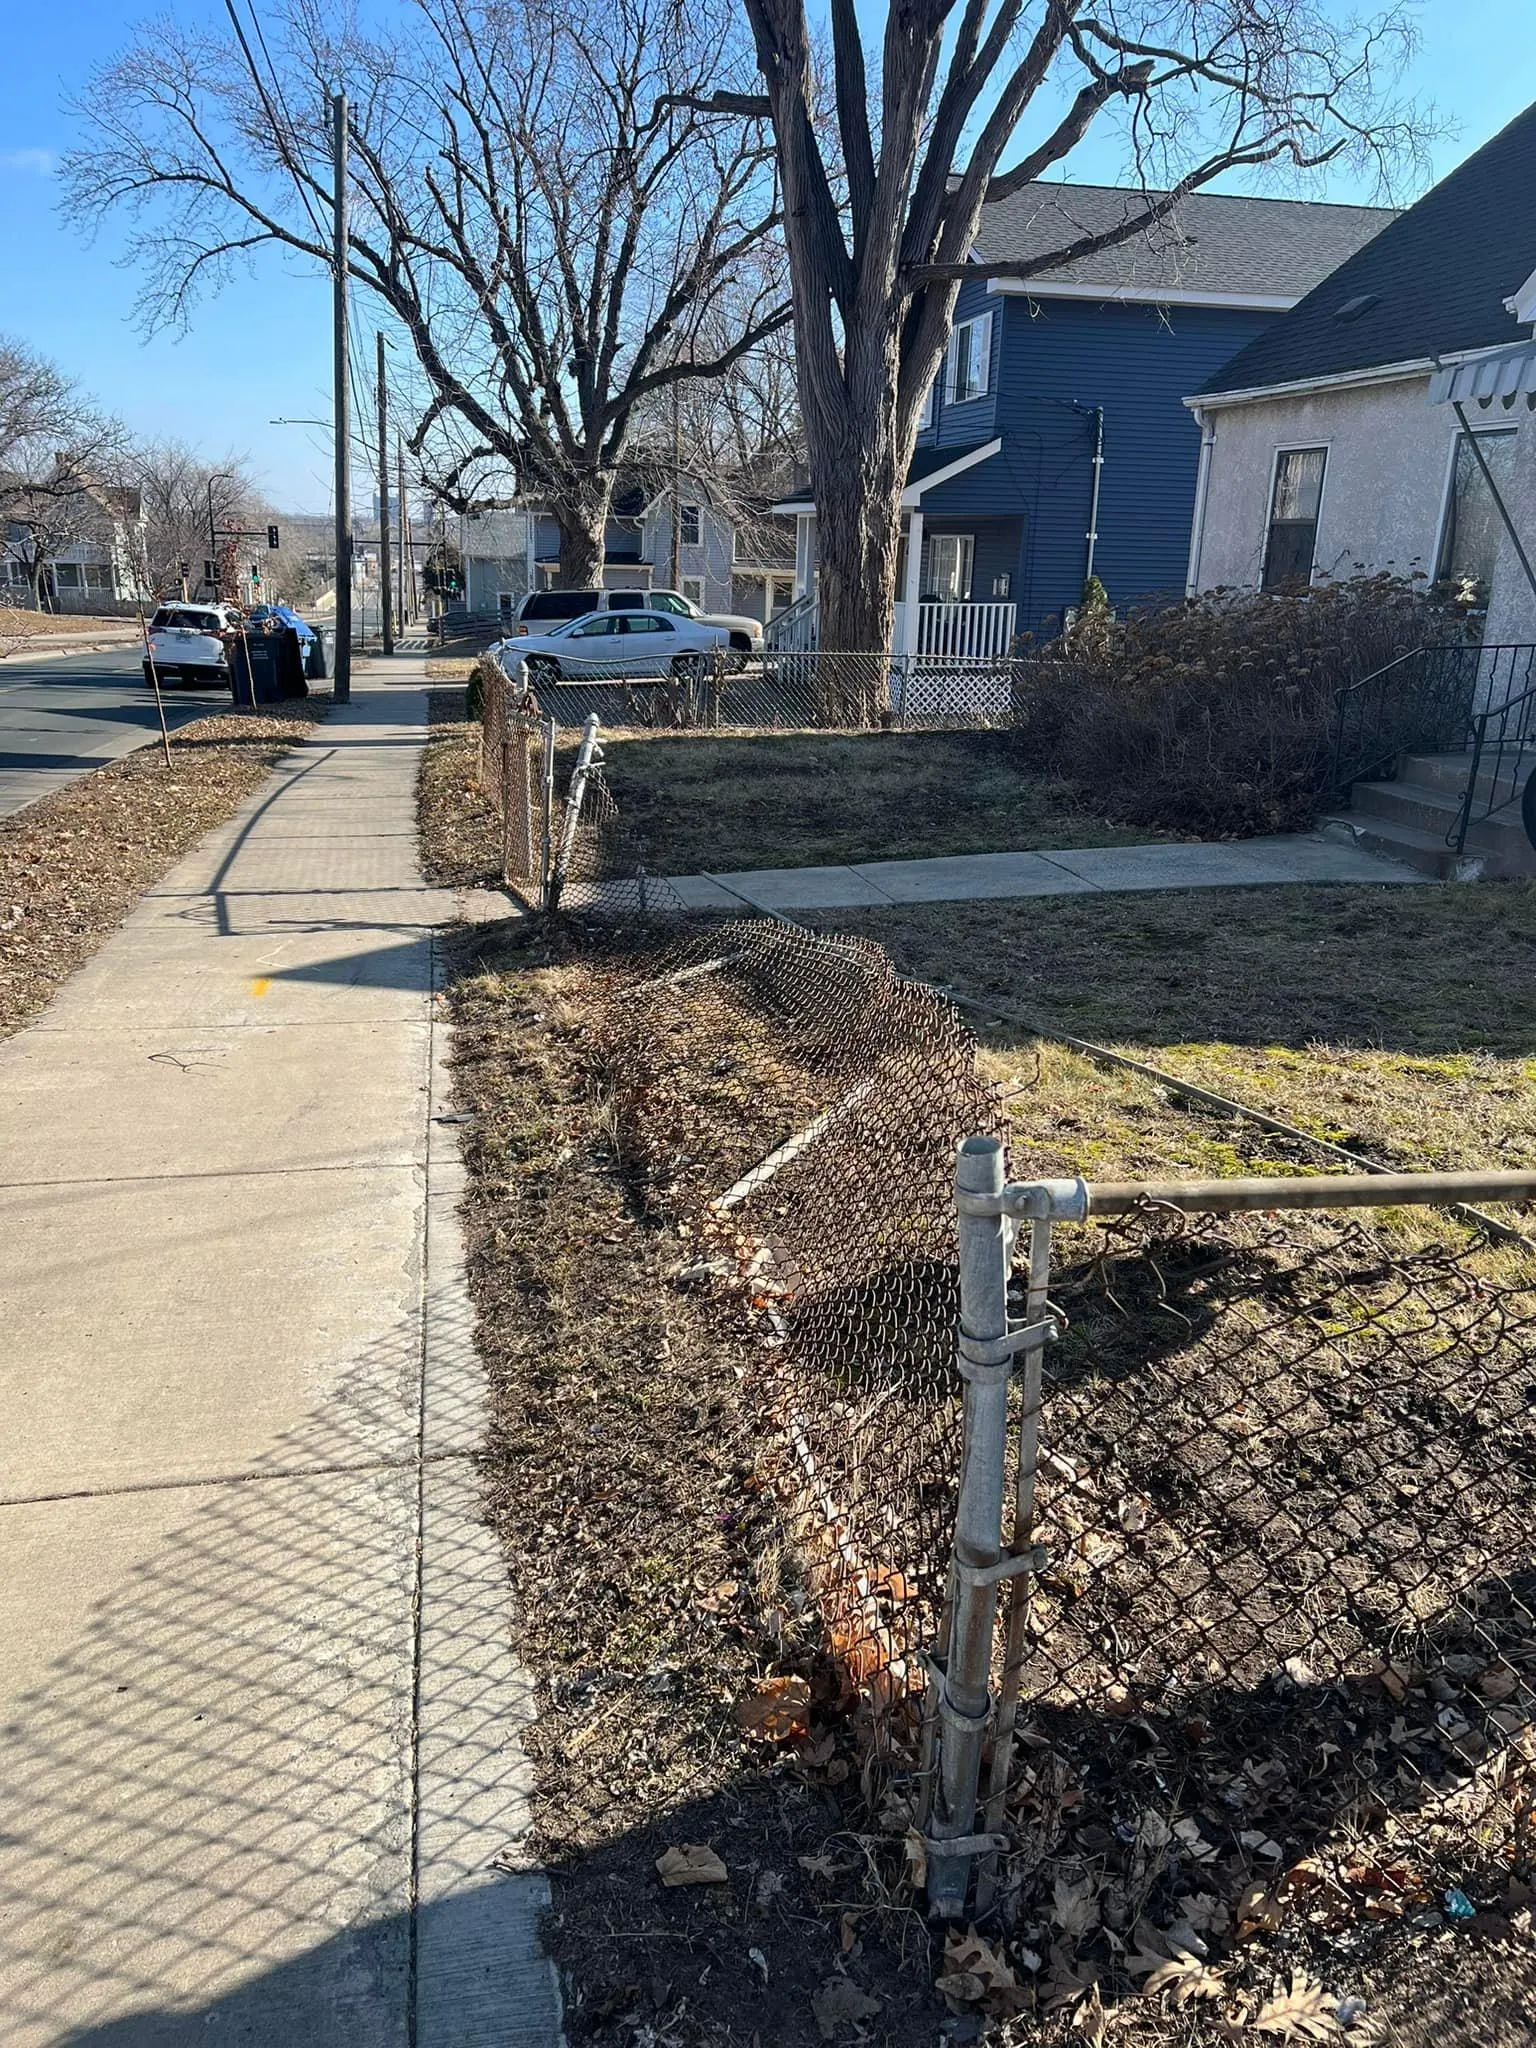 Wood Fence Installation for 321 Fence Inc. in Fairbault, MN